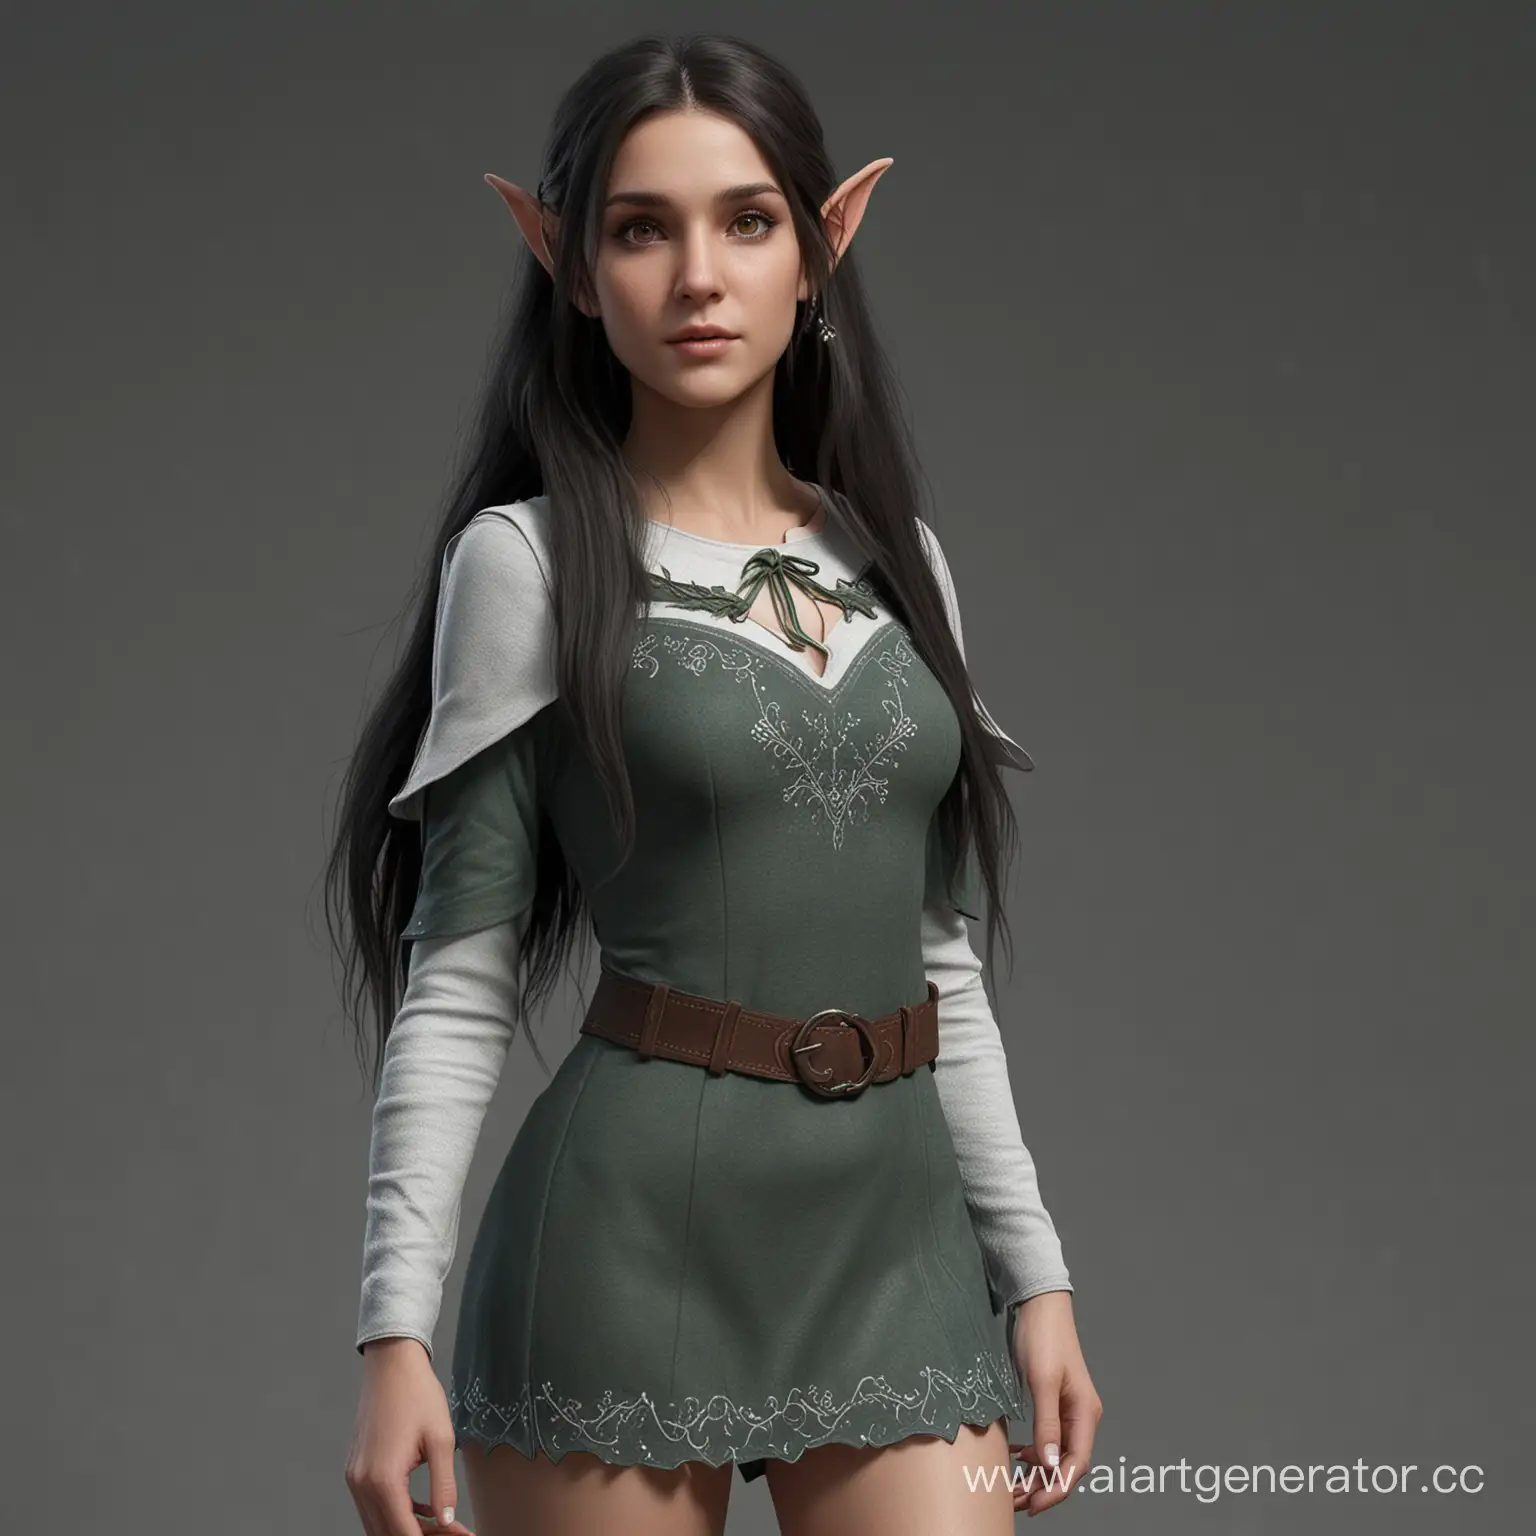 Realistic-Elf-Character-with-Long-Dark-Hair-and-Gray-Eyes-in-FullLength-3D-View